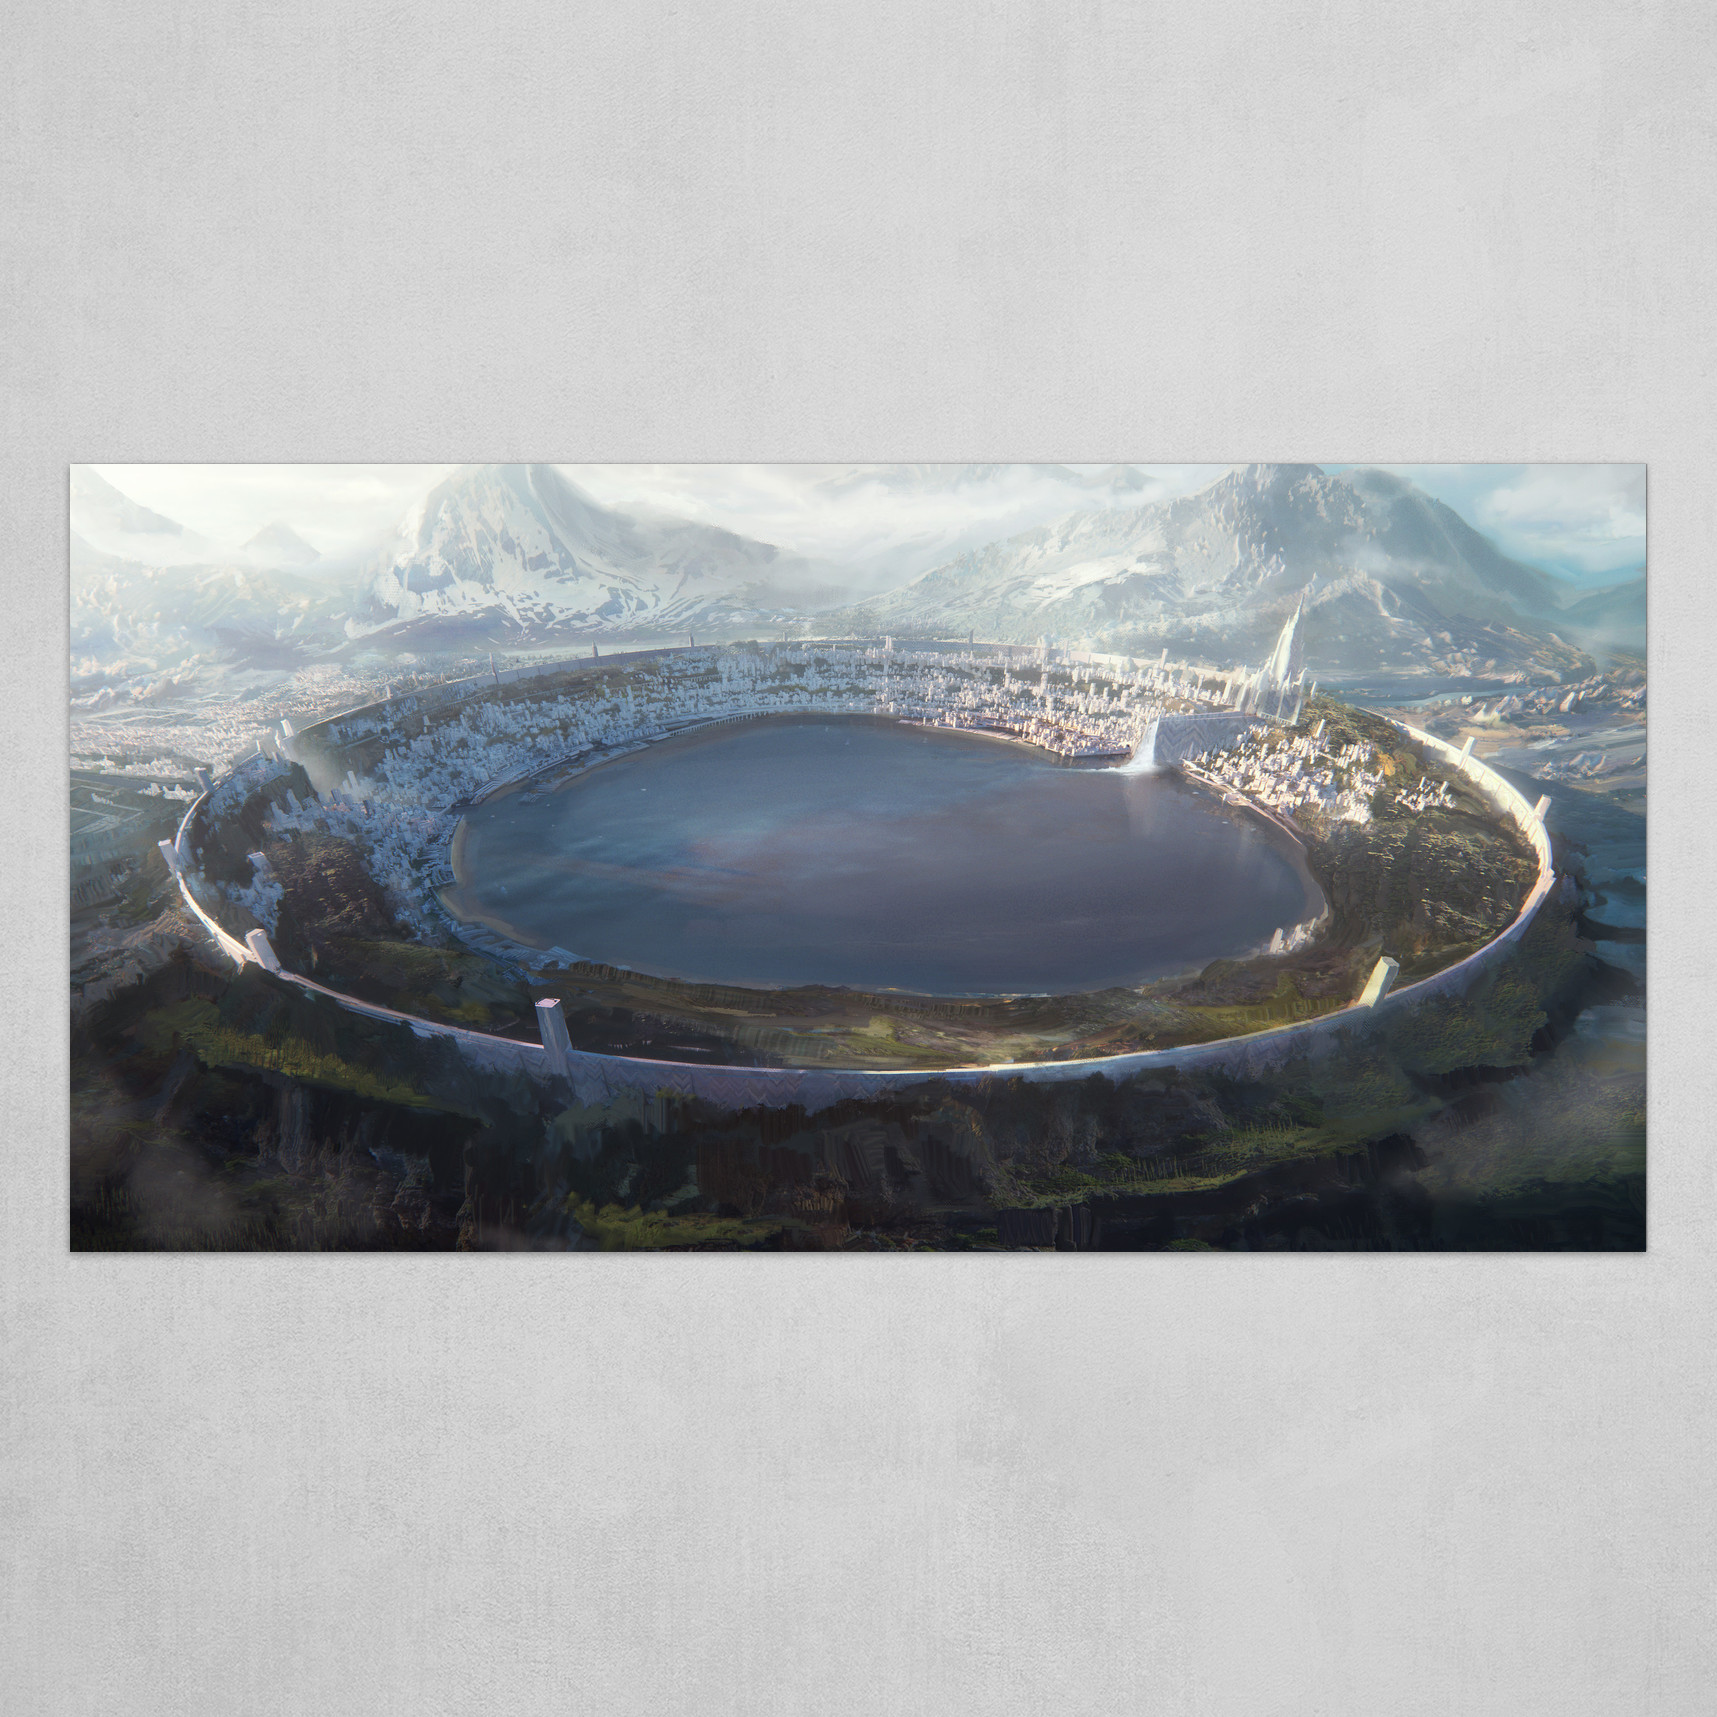 Crater city